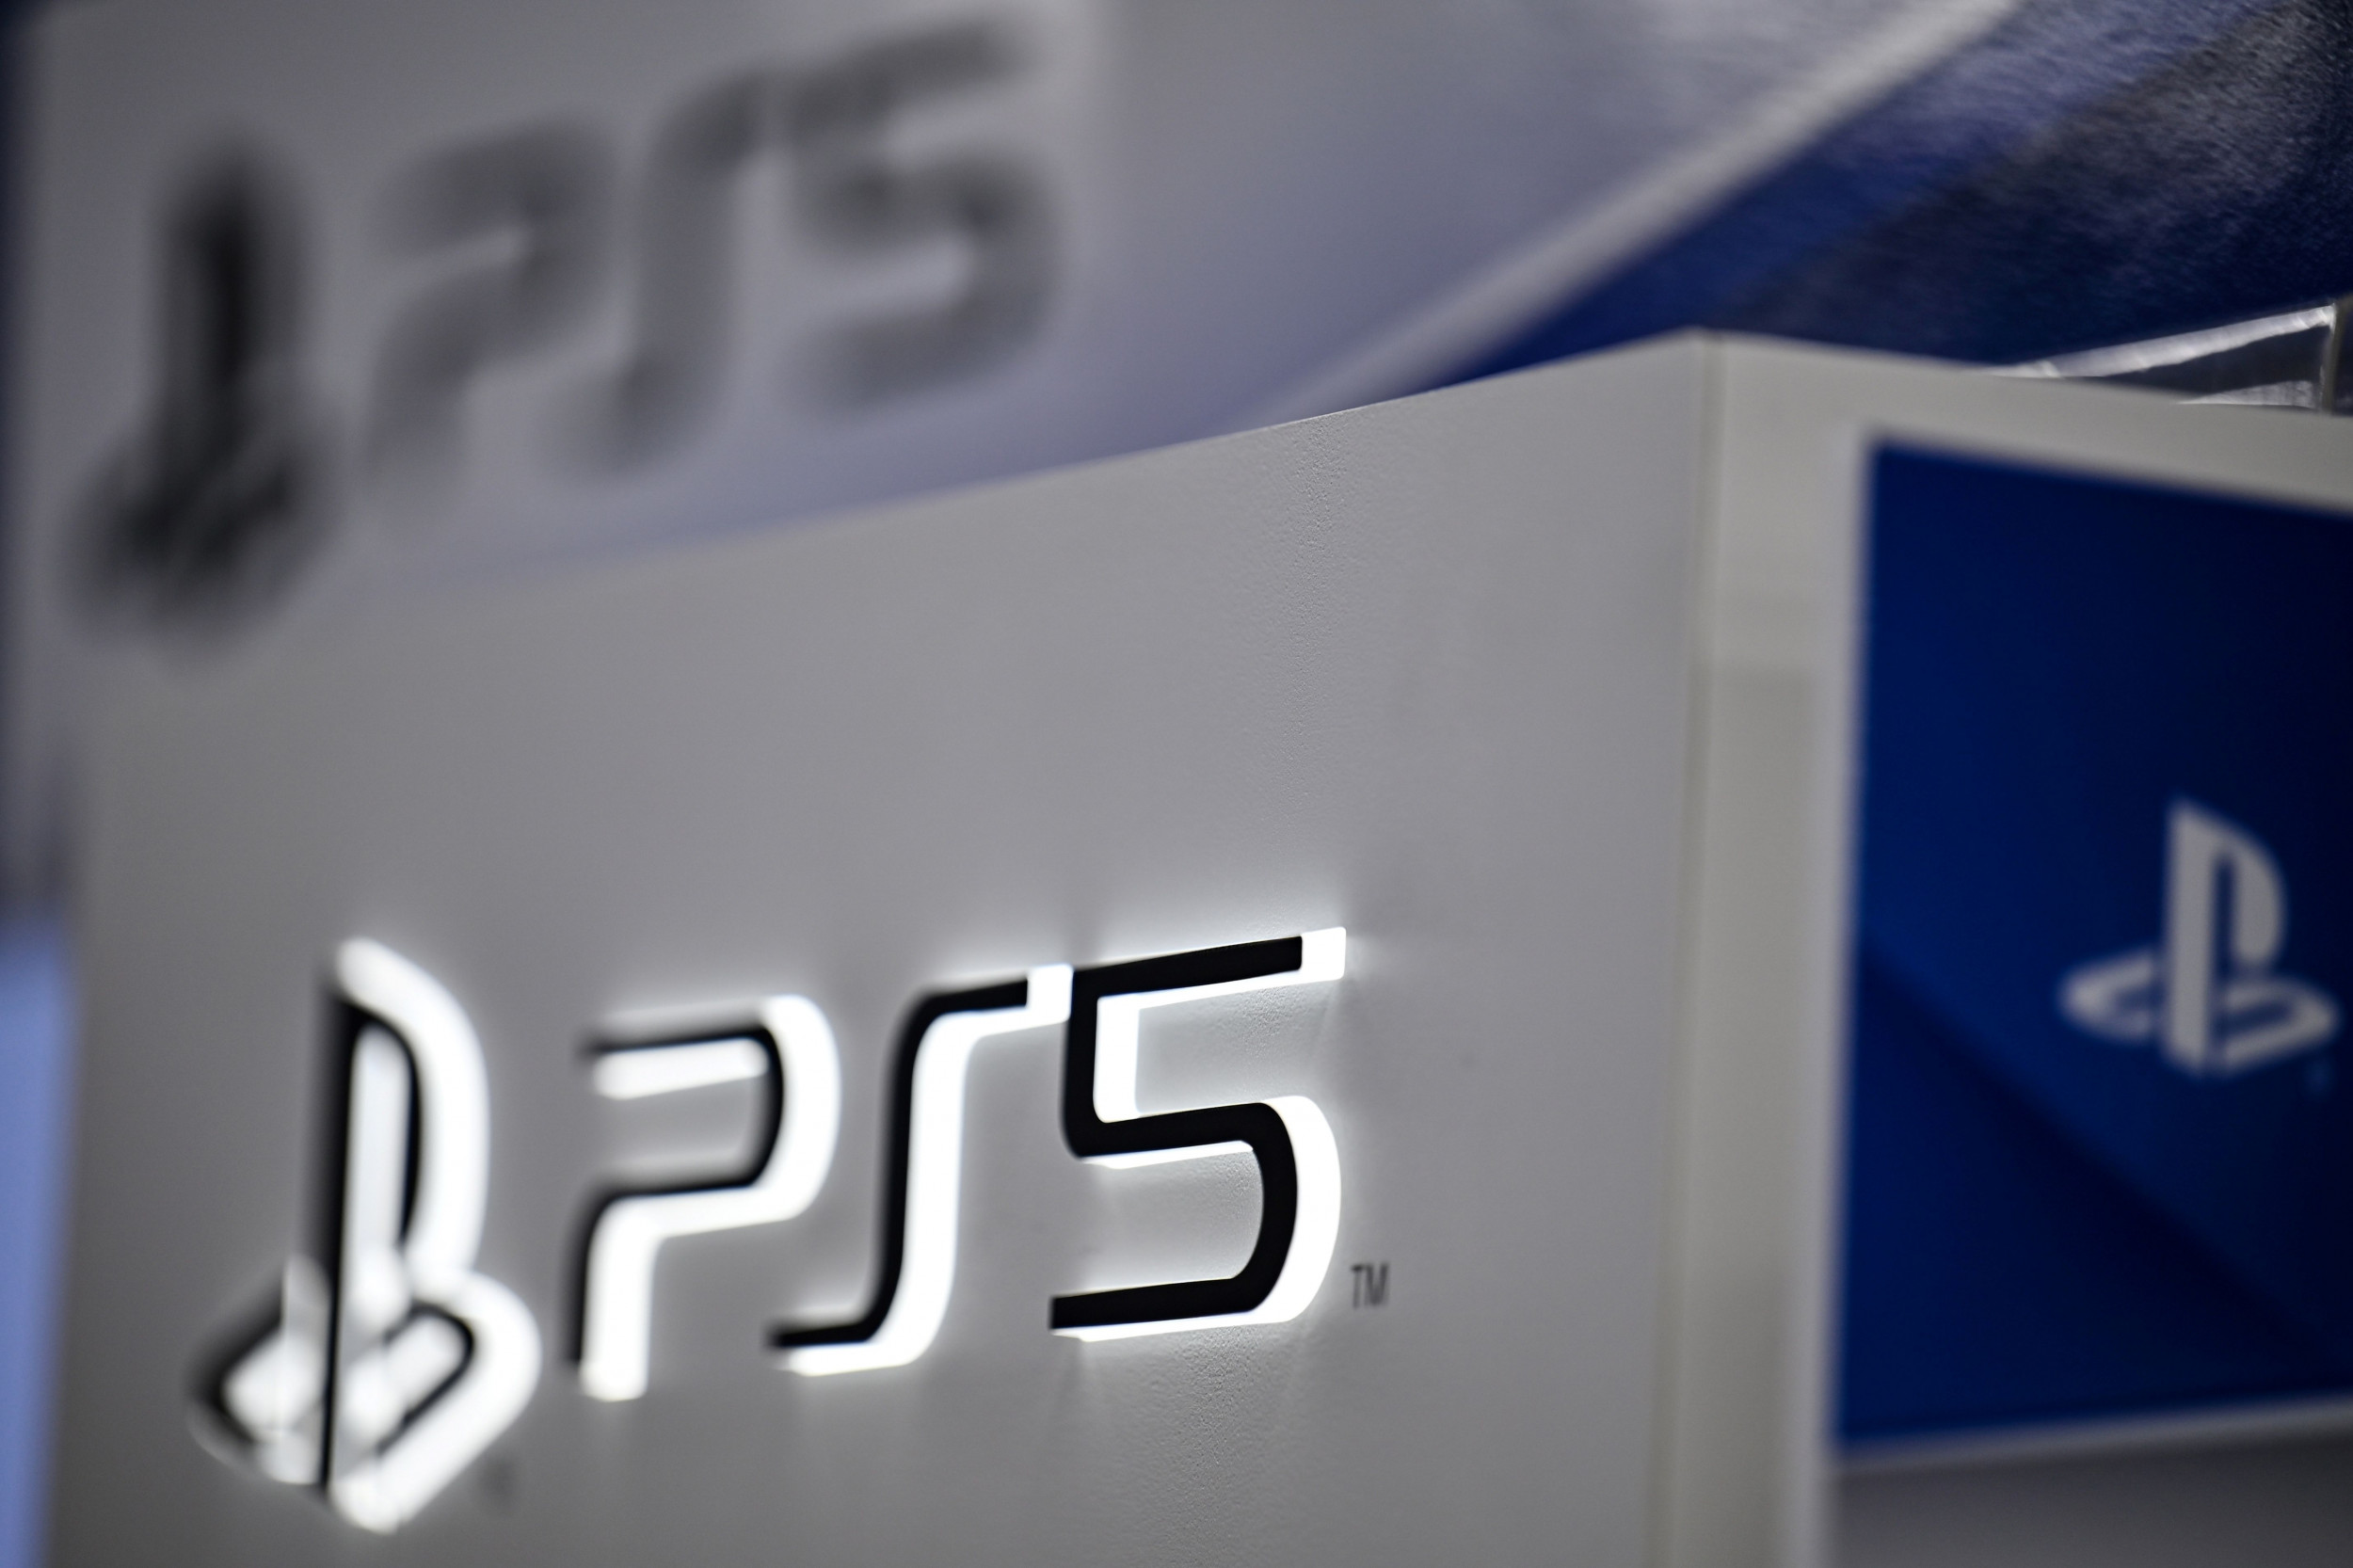 PS5 refueling update for Amazon, Best Buy, Newegg, Walmart and more